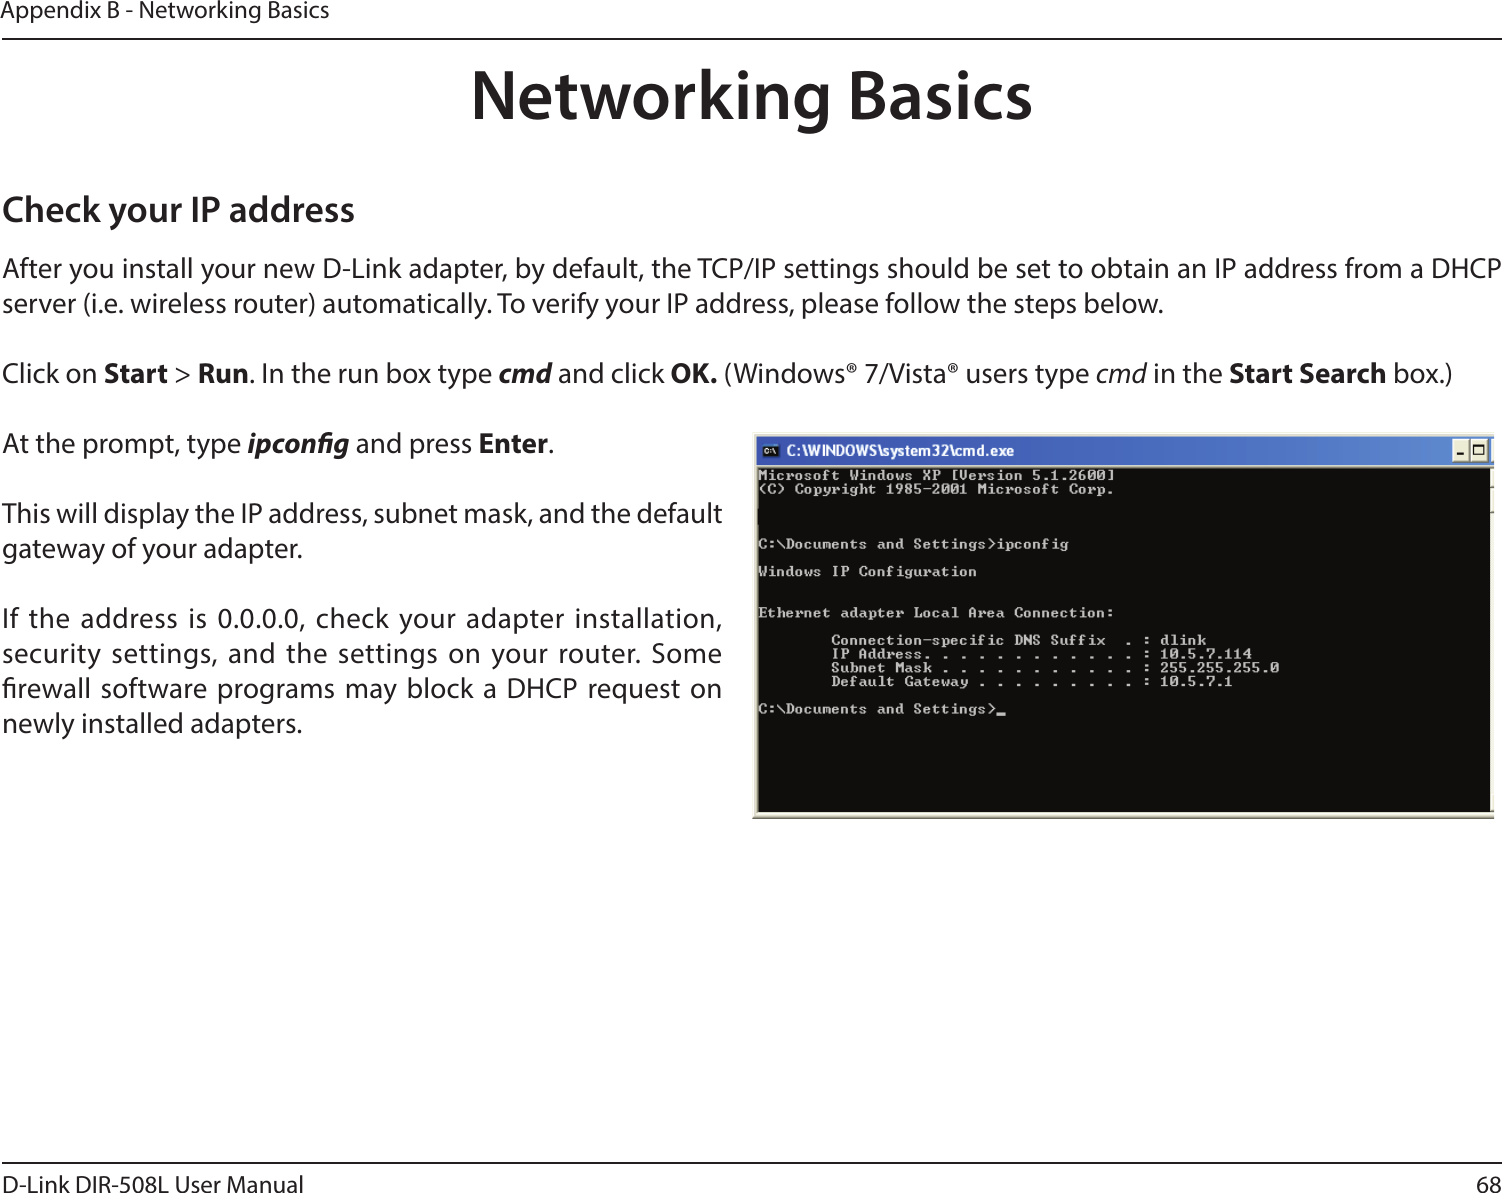 68D-Link DIR-508L User ManualAppendix B - Networking BasicsNetworking BasicsCheck your IP addressAfter you install your new D-Link adapter, by default, the TCP/IP settings should be set to obtain an IP address from a DHCP server (i.e. wireless router) automatically. To verify your IP address, please follow the steps below.Click on Start &gt; Run. In the run box type cmd and click OK. (Windows® 7/Vista® users type cmd in the Start Search box.)At the prompt, type ipcong and press Enter.This will display the IP address, subnet mask, and the default gateway of your adapter.If the address is 0.0.0.0, check your adapter installation, security settings, and the settings on your router. Some rewall software programs may block a DHCP request on newly installed adapters. 